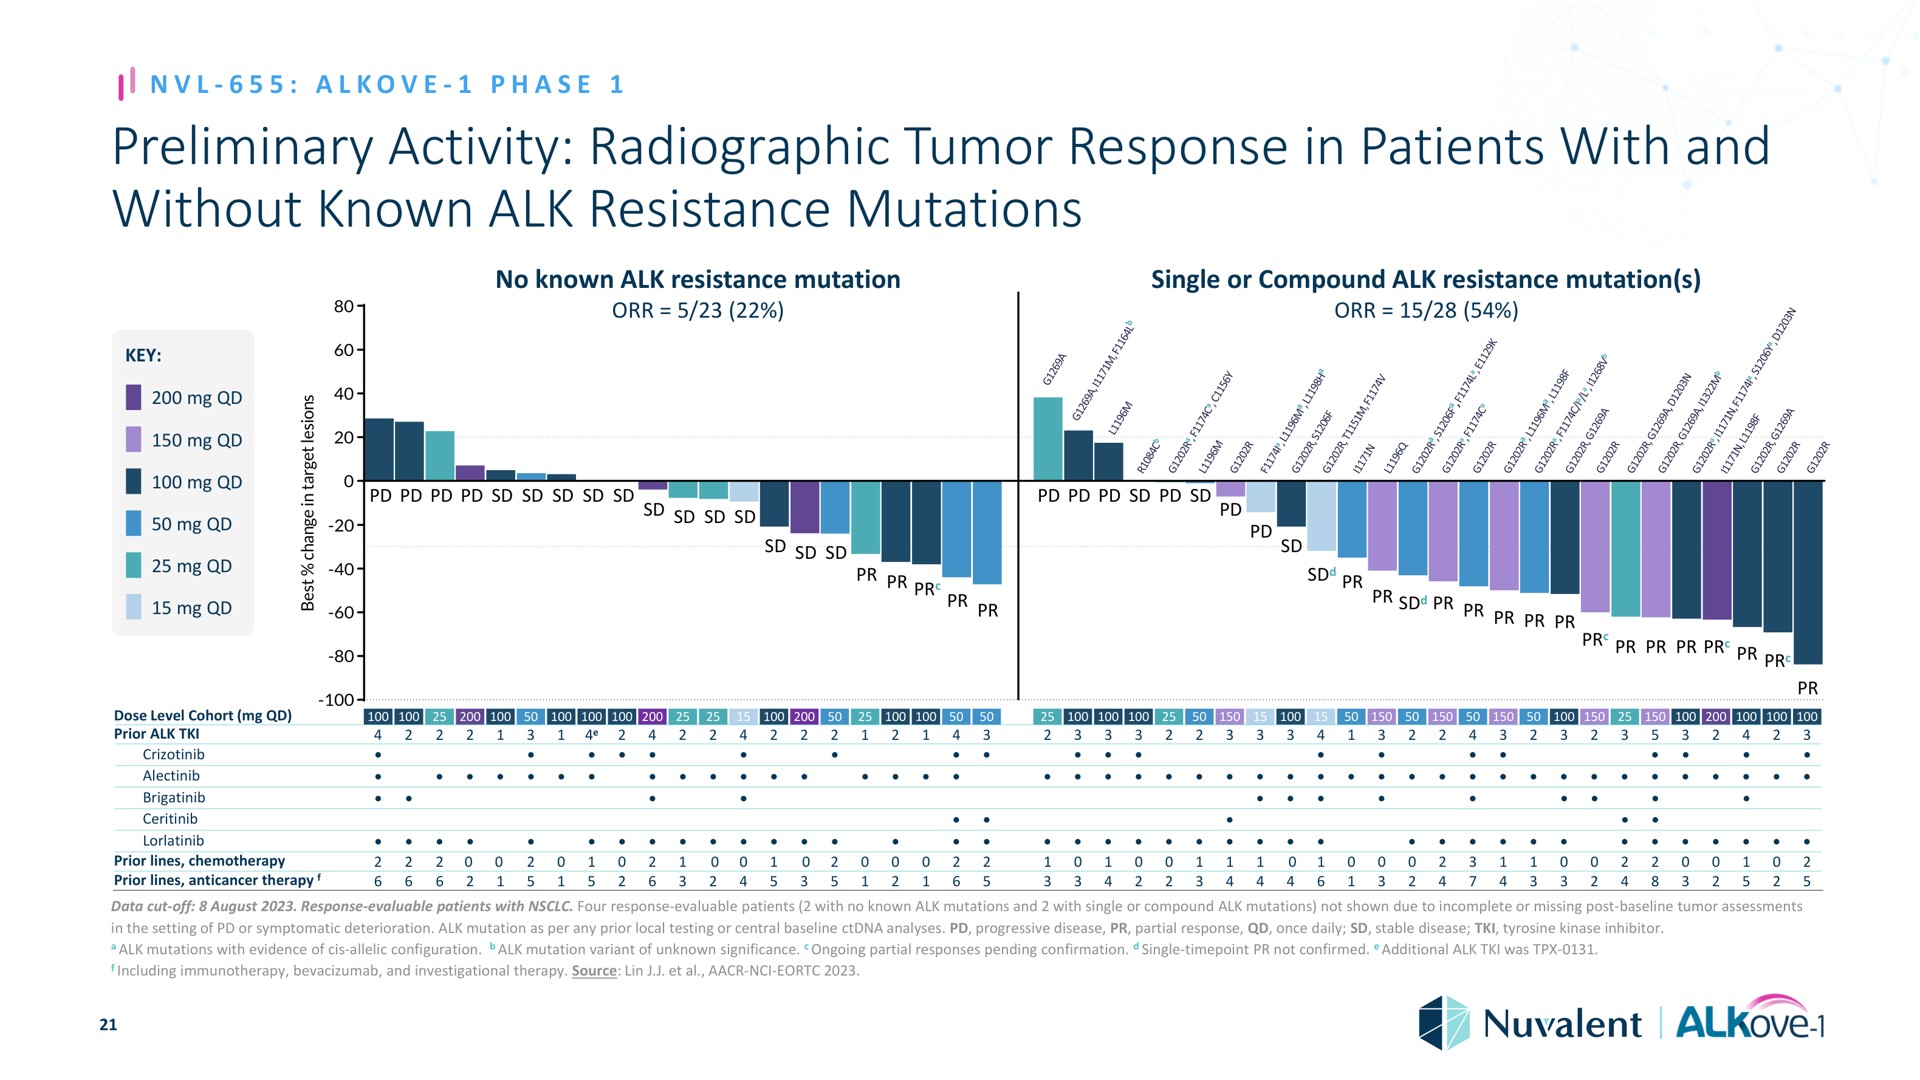 preliminary activity radiographic tumor response in patients with and without known alk resistance mutations phase key a a dose level cohort prior no mutation single or compound mutation a a holla a prior lines chemotherapy prior lines anticancer therapy data cut off august response evaluable four response evaluable no single or compound not shown due to incomplete or missing post assessments the setting of or symptomatic deterioration mutation as per any prior local testing or central analyses progressive disease partial once daily stable disease tyrosine kinase inhibitor evidence of allelic configuration mutation variant of unknown significance ongoing partial responses pending confirmation single not confirmed additional was including investigational therapy source lin i i | Nuvalent